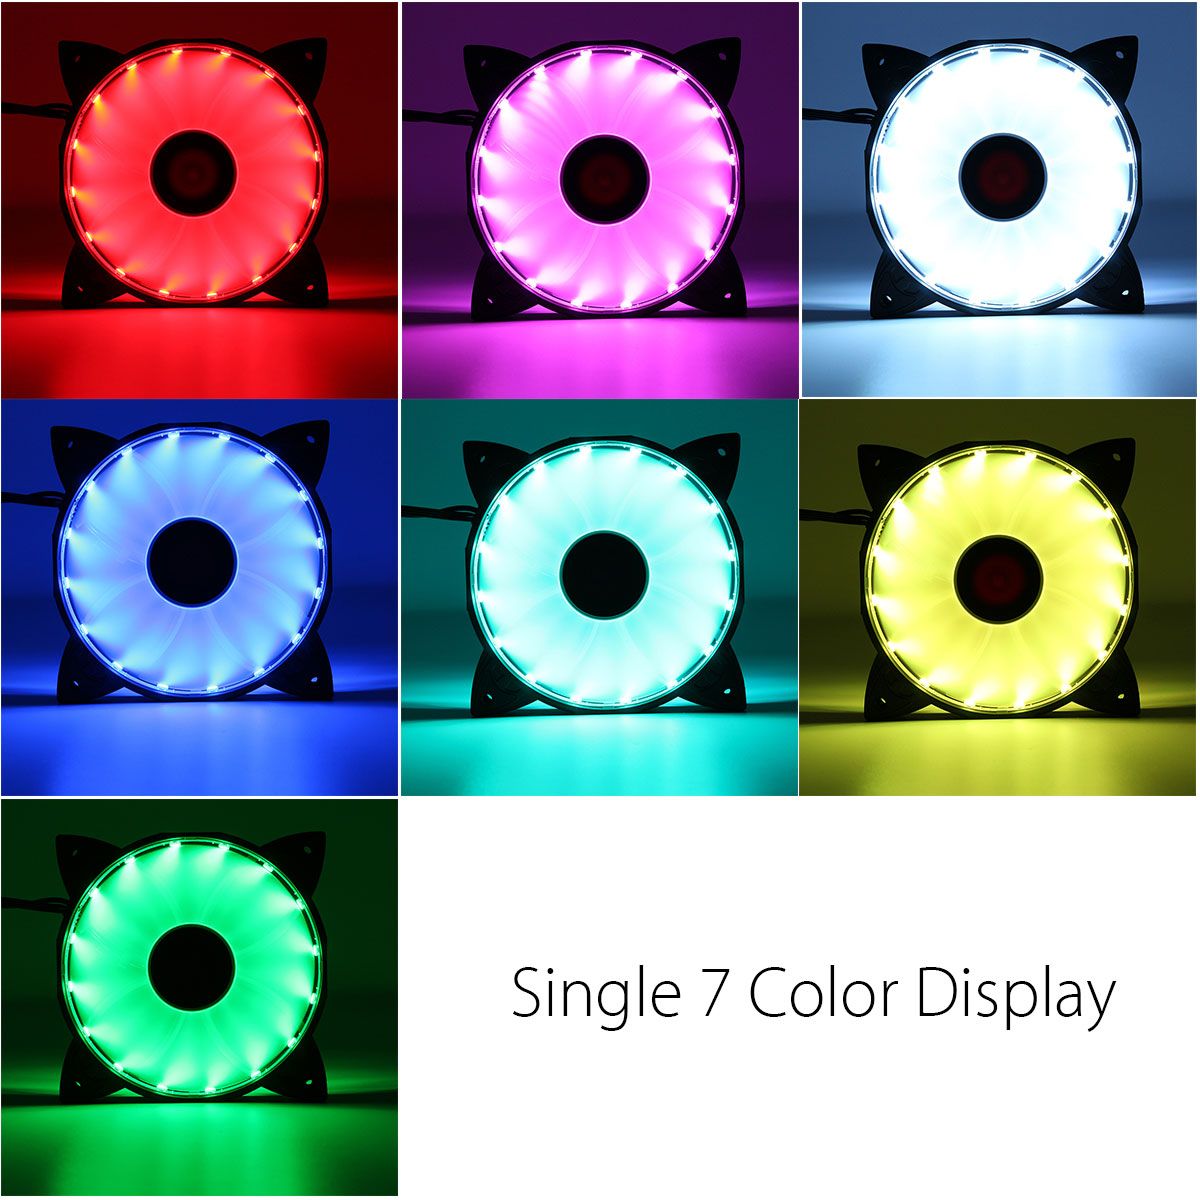 Coolmoon-6PCS-120mm-RGB-Adjustable-LED-Cooling-Fan-with-Controller-Remote-For-Computer-1198249